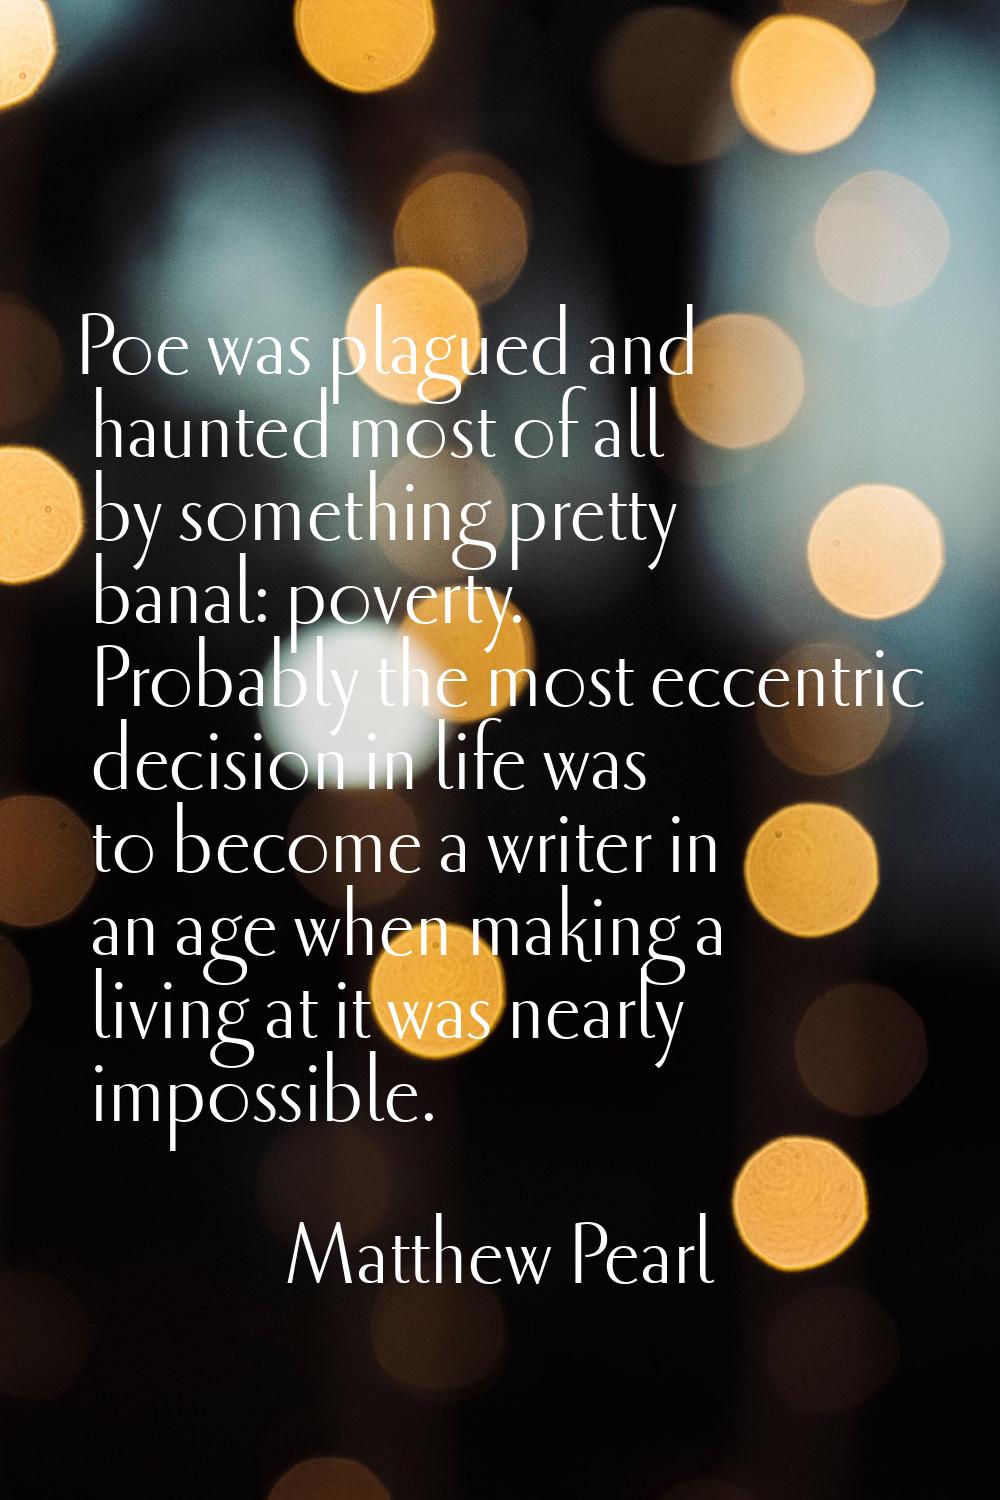 Poe was plagued and haunted most of all by something pretty banal: poverty. Probably the most eccen